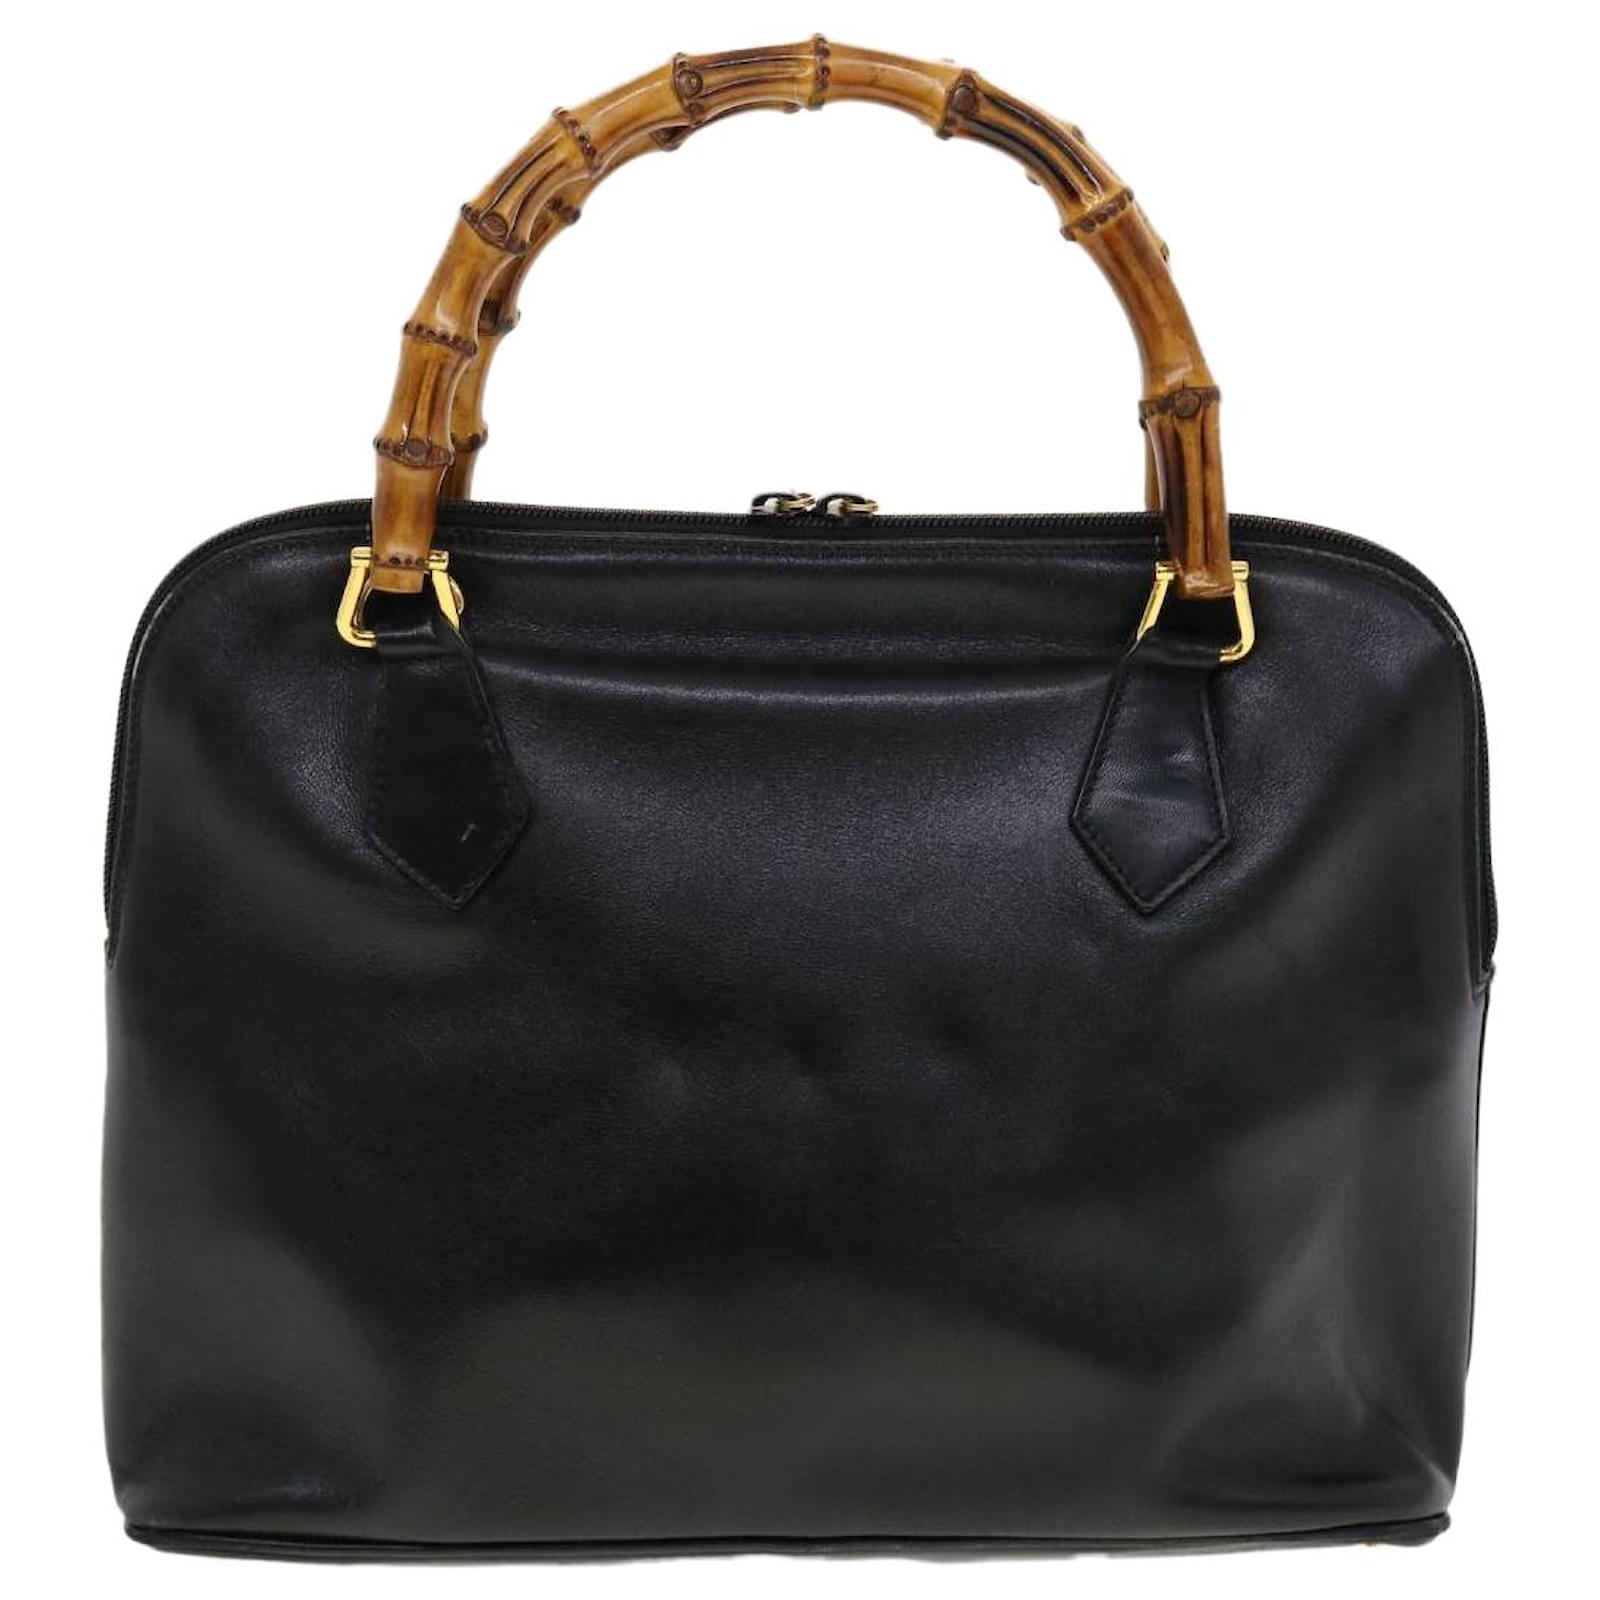 GUCCI Bamboo Hand Bag Leather 2way Black 000.1186.0289 Auth ar9279